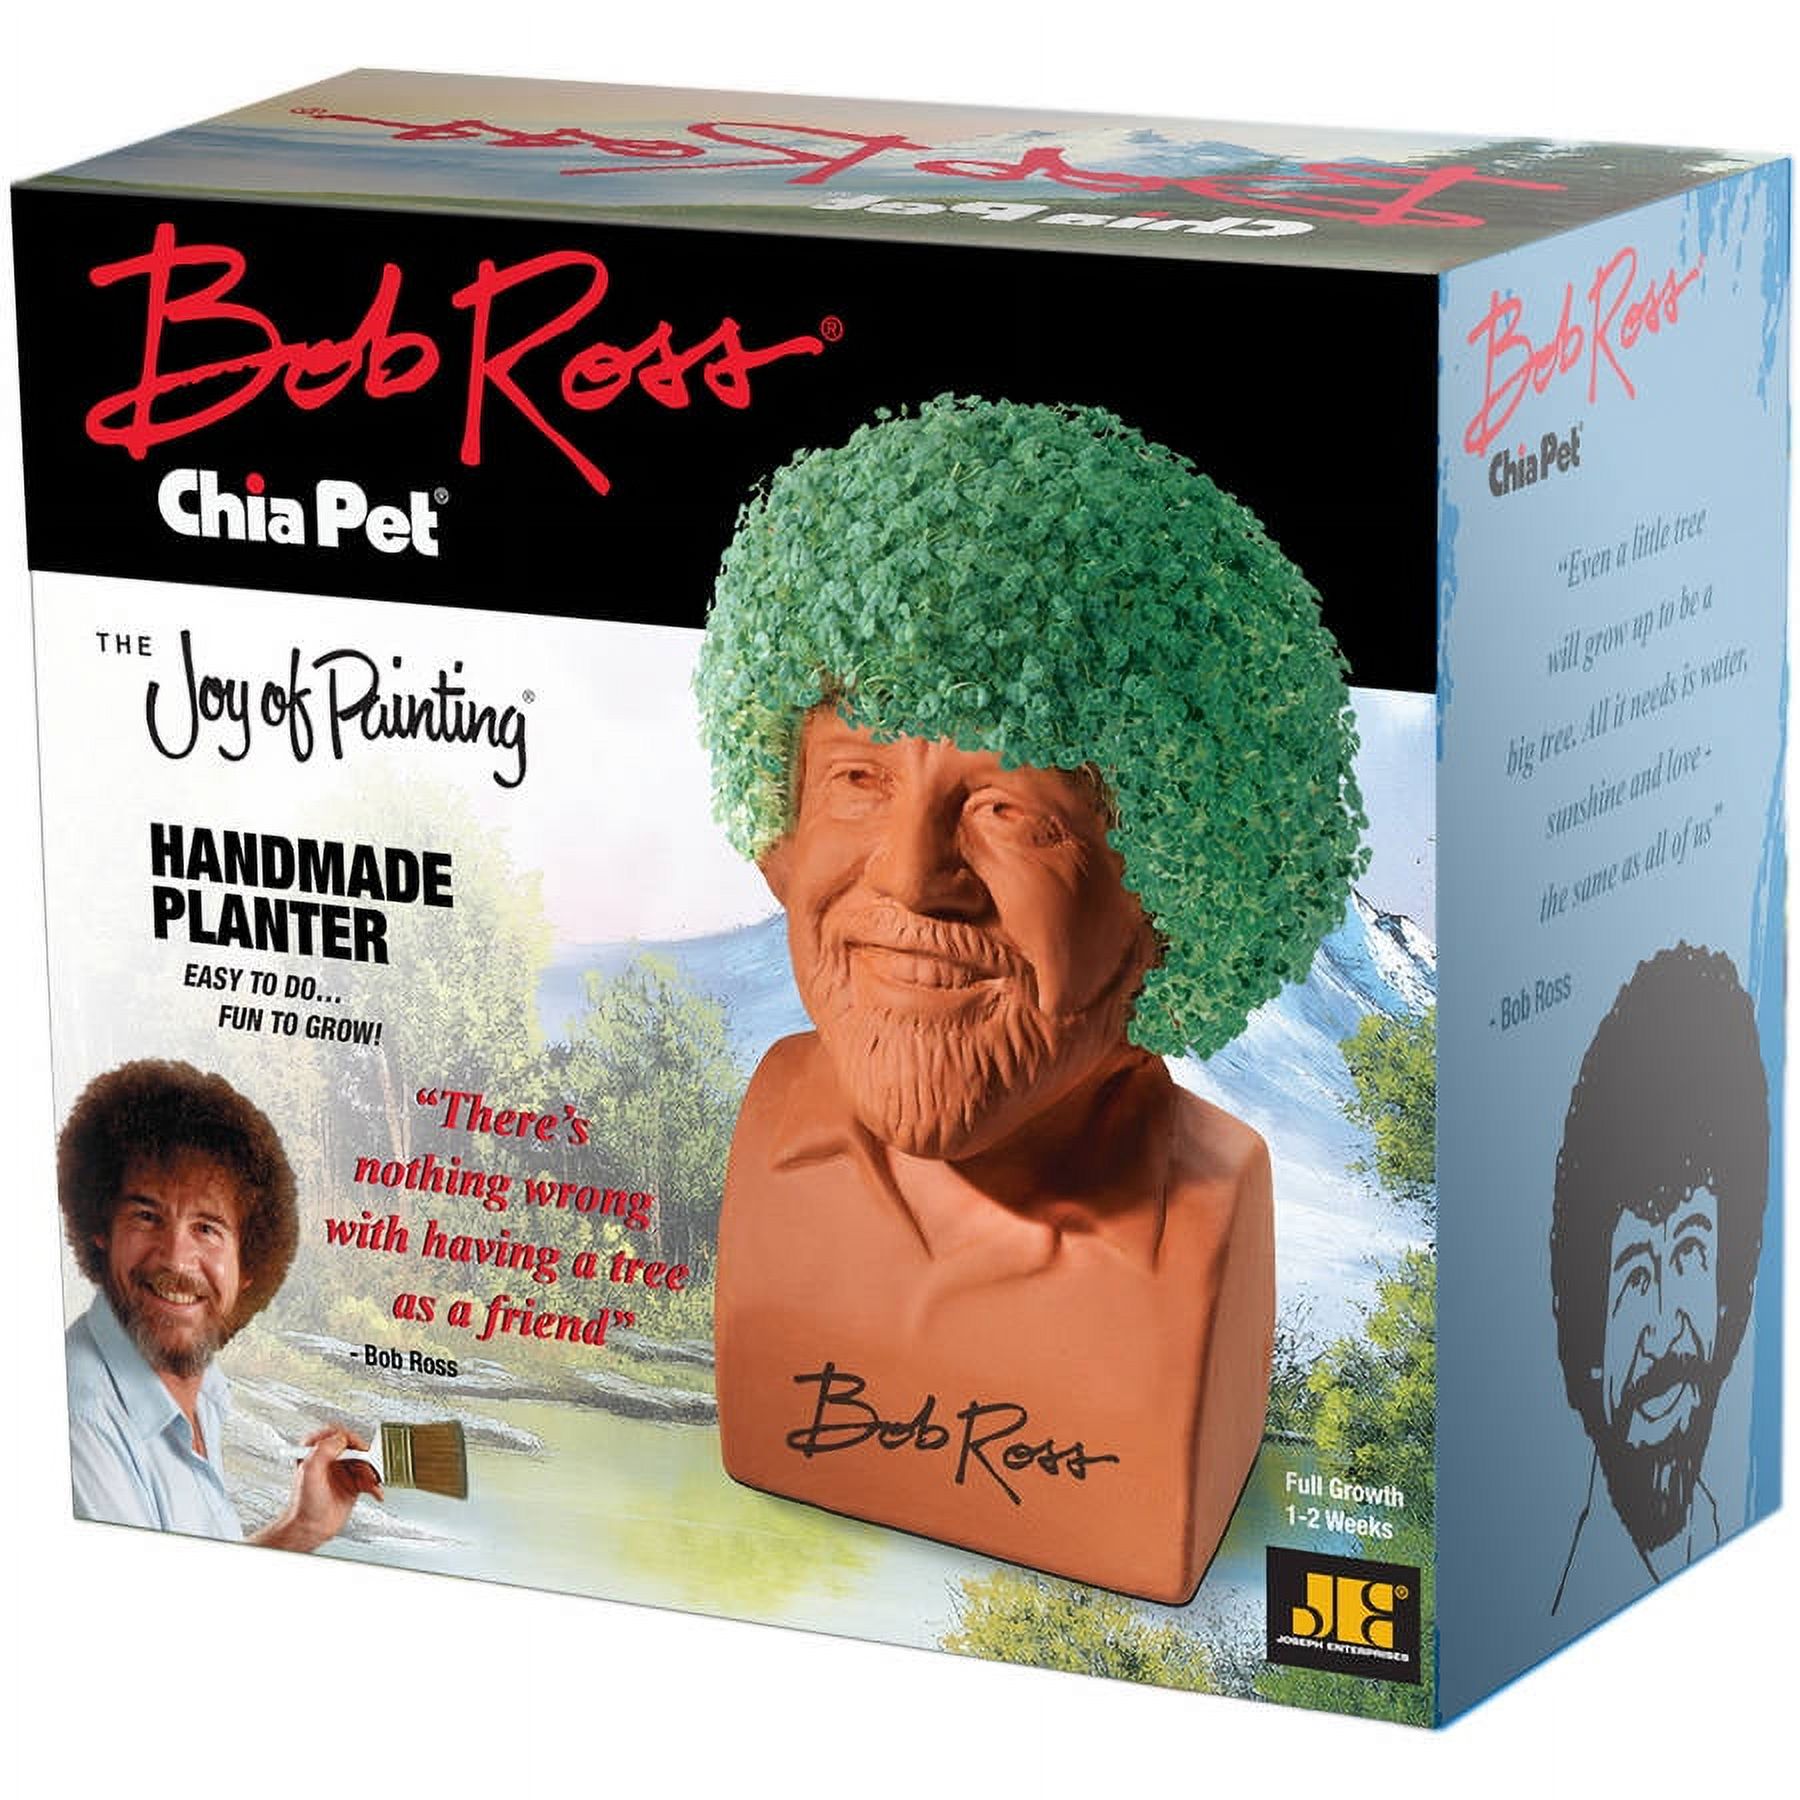 Chia Pet Bob Ross (The Joy of Painting) - Decorative Pot Easy to Do Fun to Grow Chia Seeds Novelty Gift - image 1 of 5